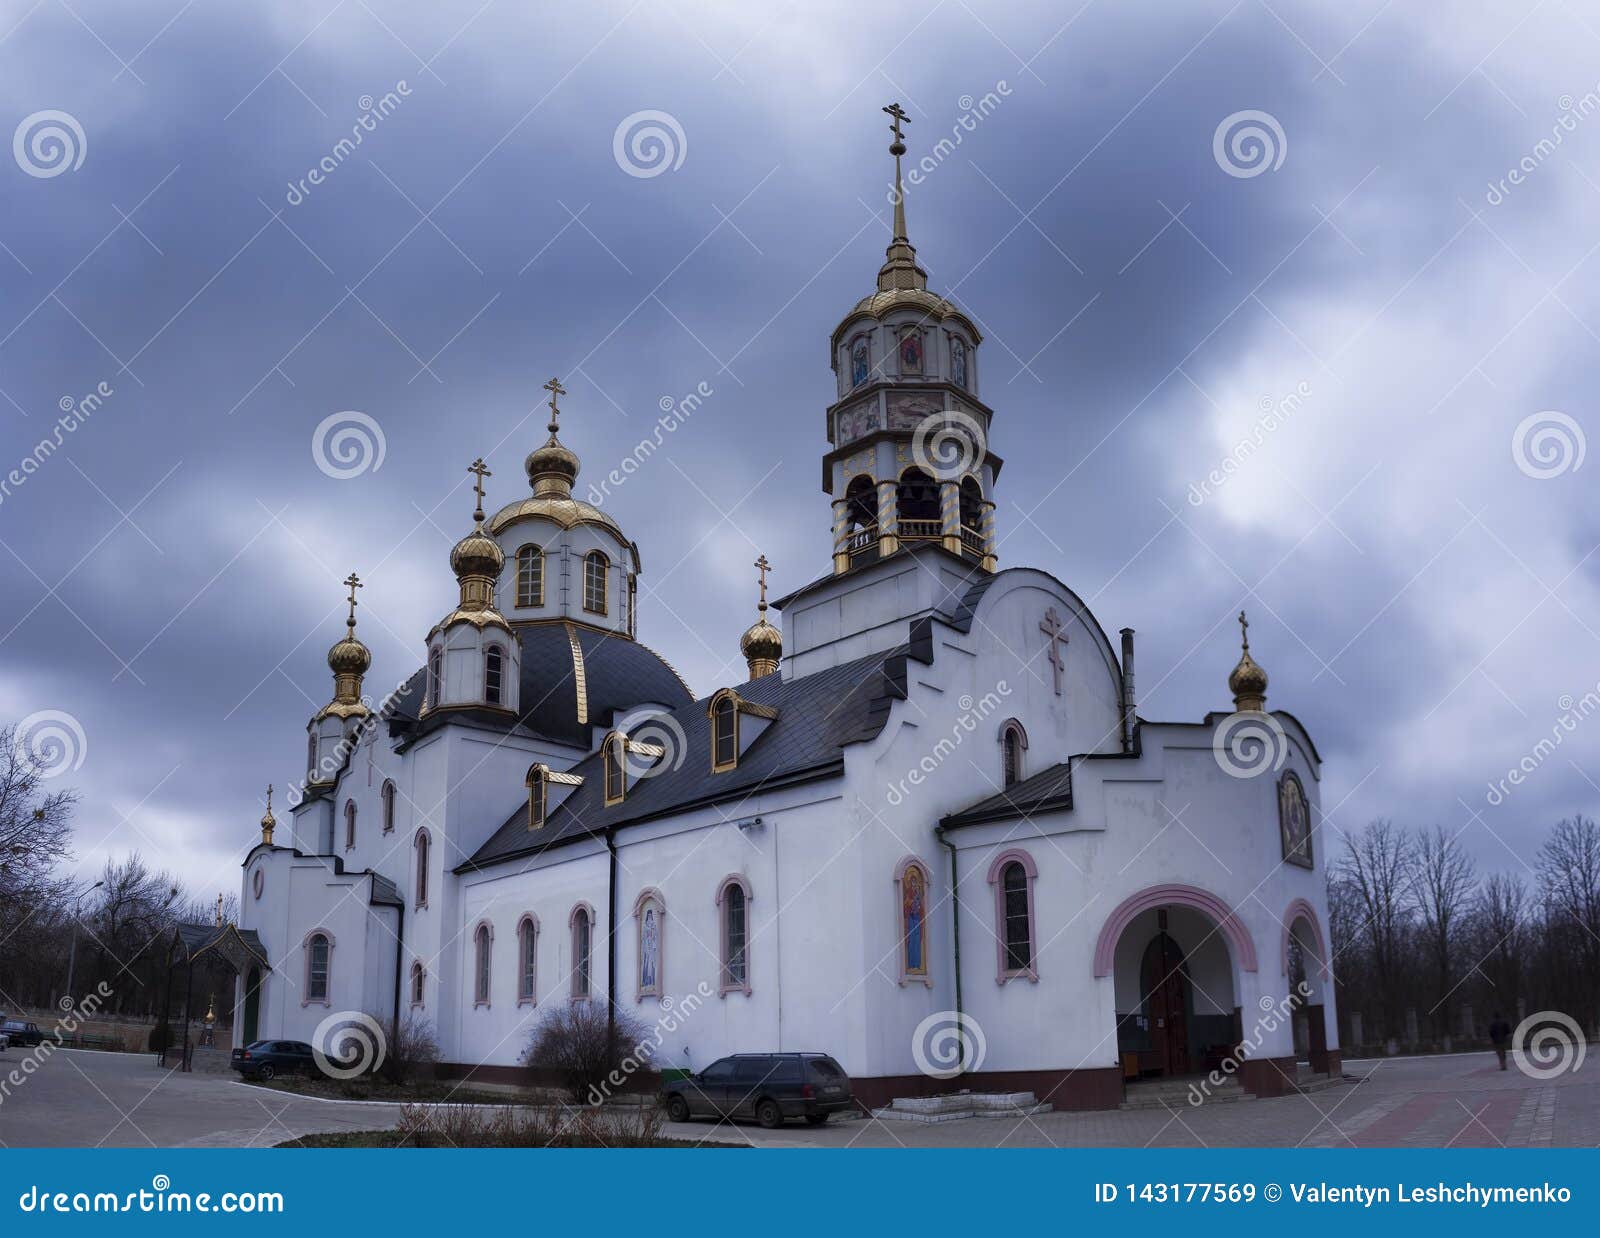 holy trinity cathedral in kramatorsk, cloudy day, march